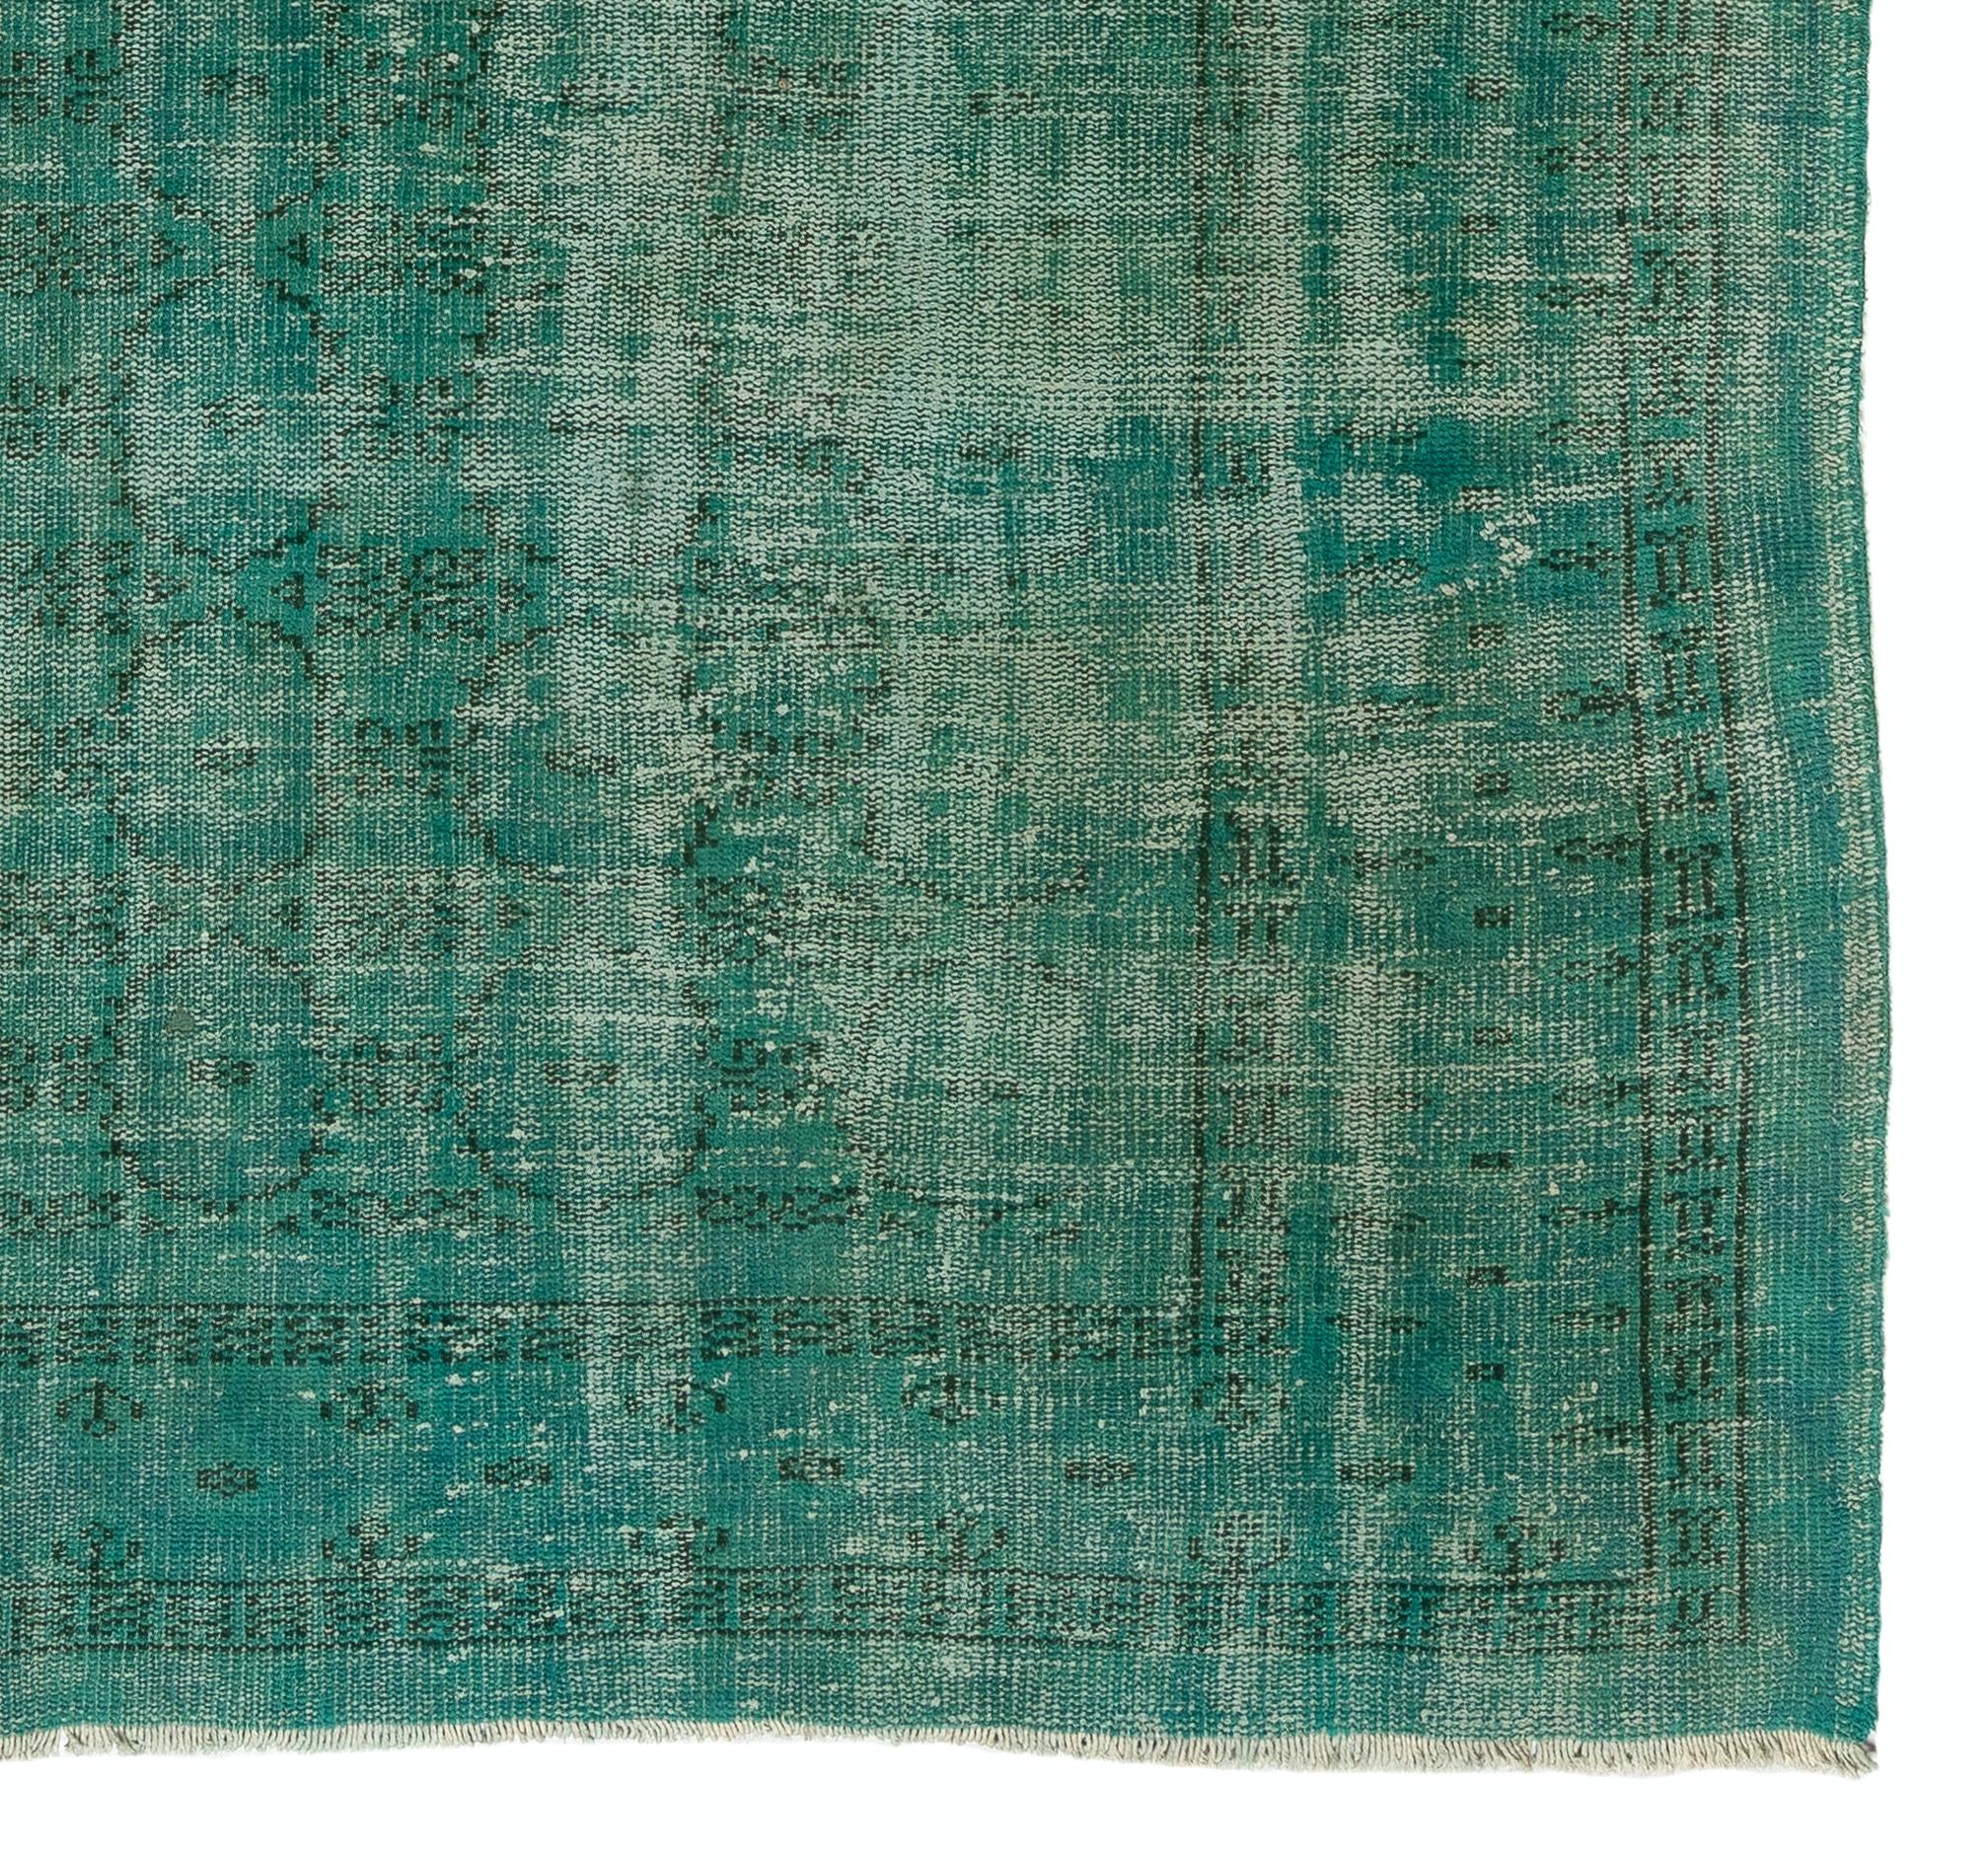 Wool 7.2x9.6 Ft Distressed Vintage Turkish Rug Re-Dyed in Teal Color for Modern Homes